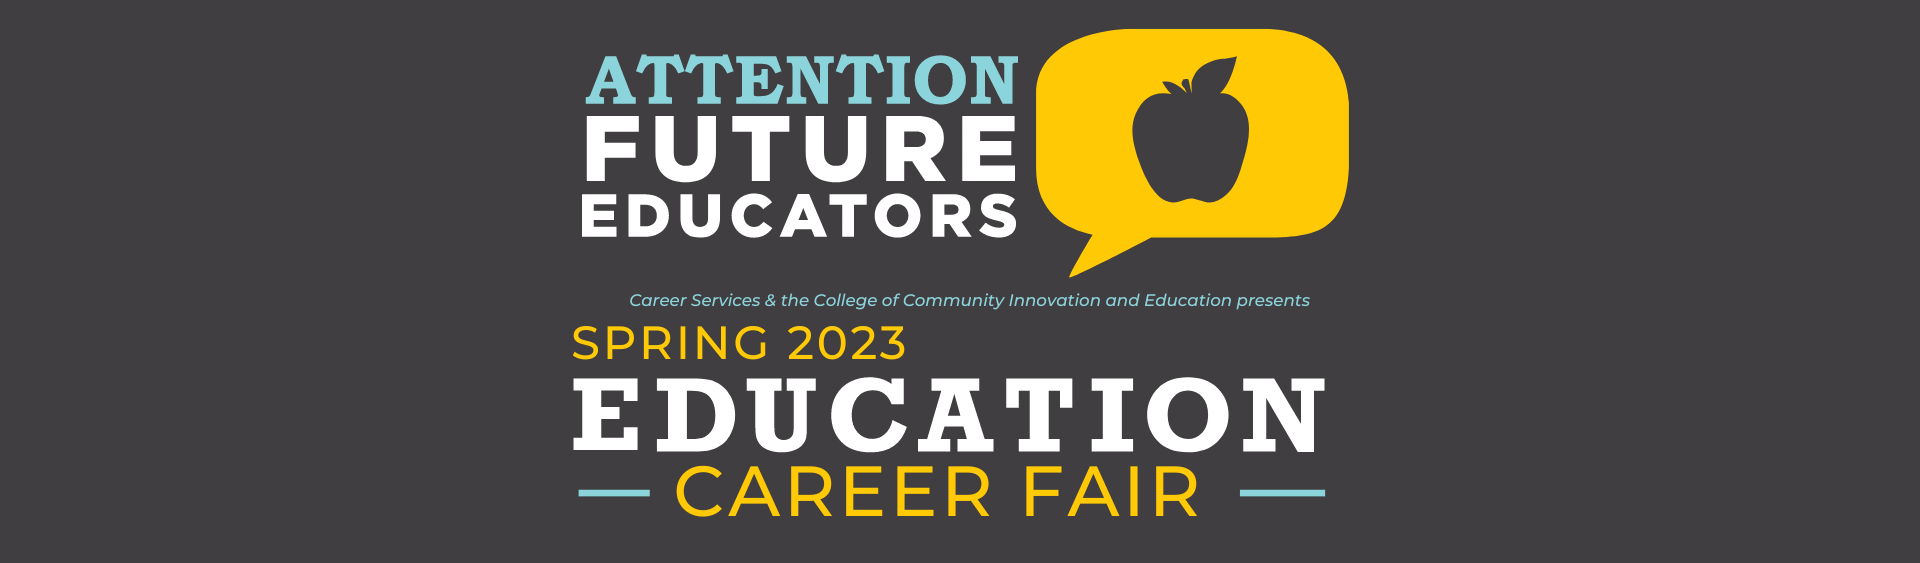 Attention Future Educators | Career Services and the College of Community Innovation and Education present | Spring 2023 Education Career Fair